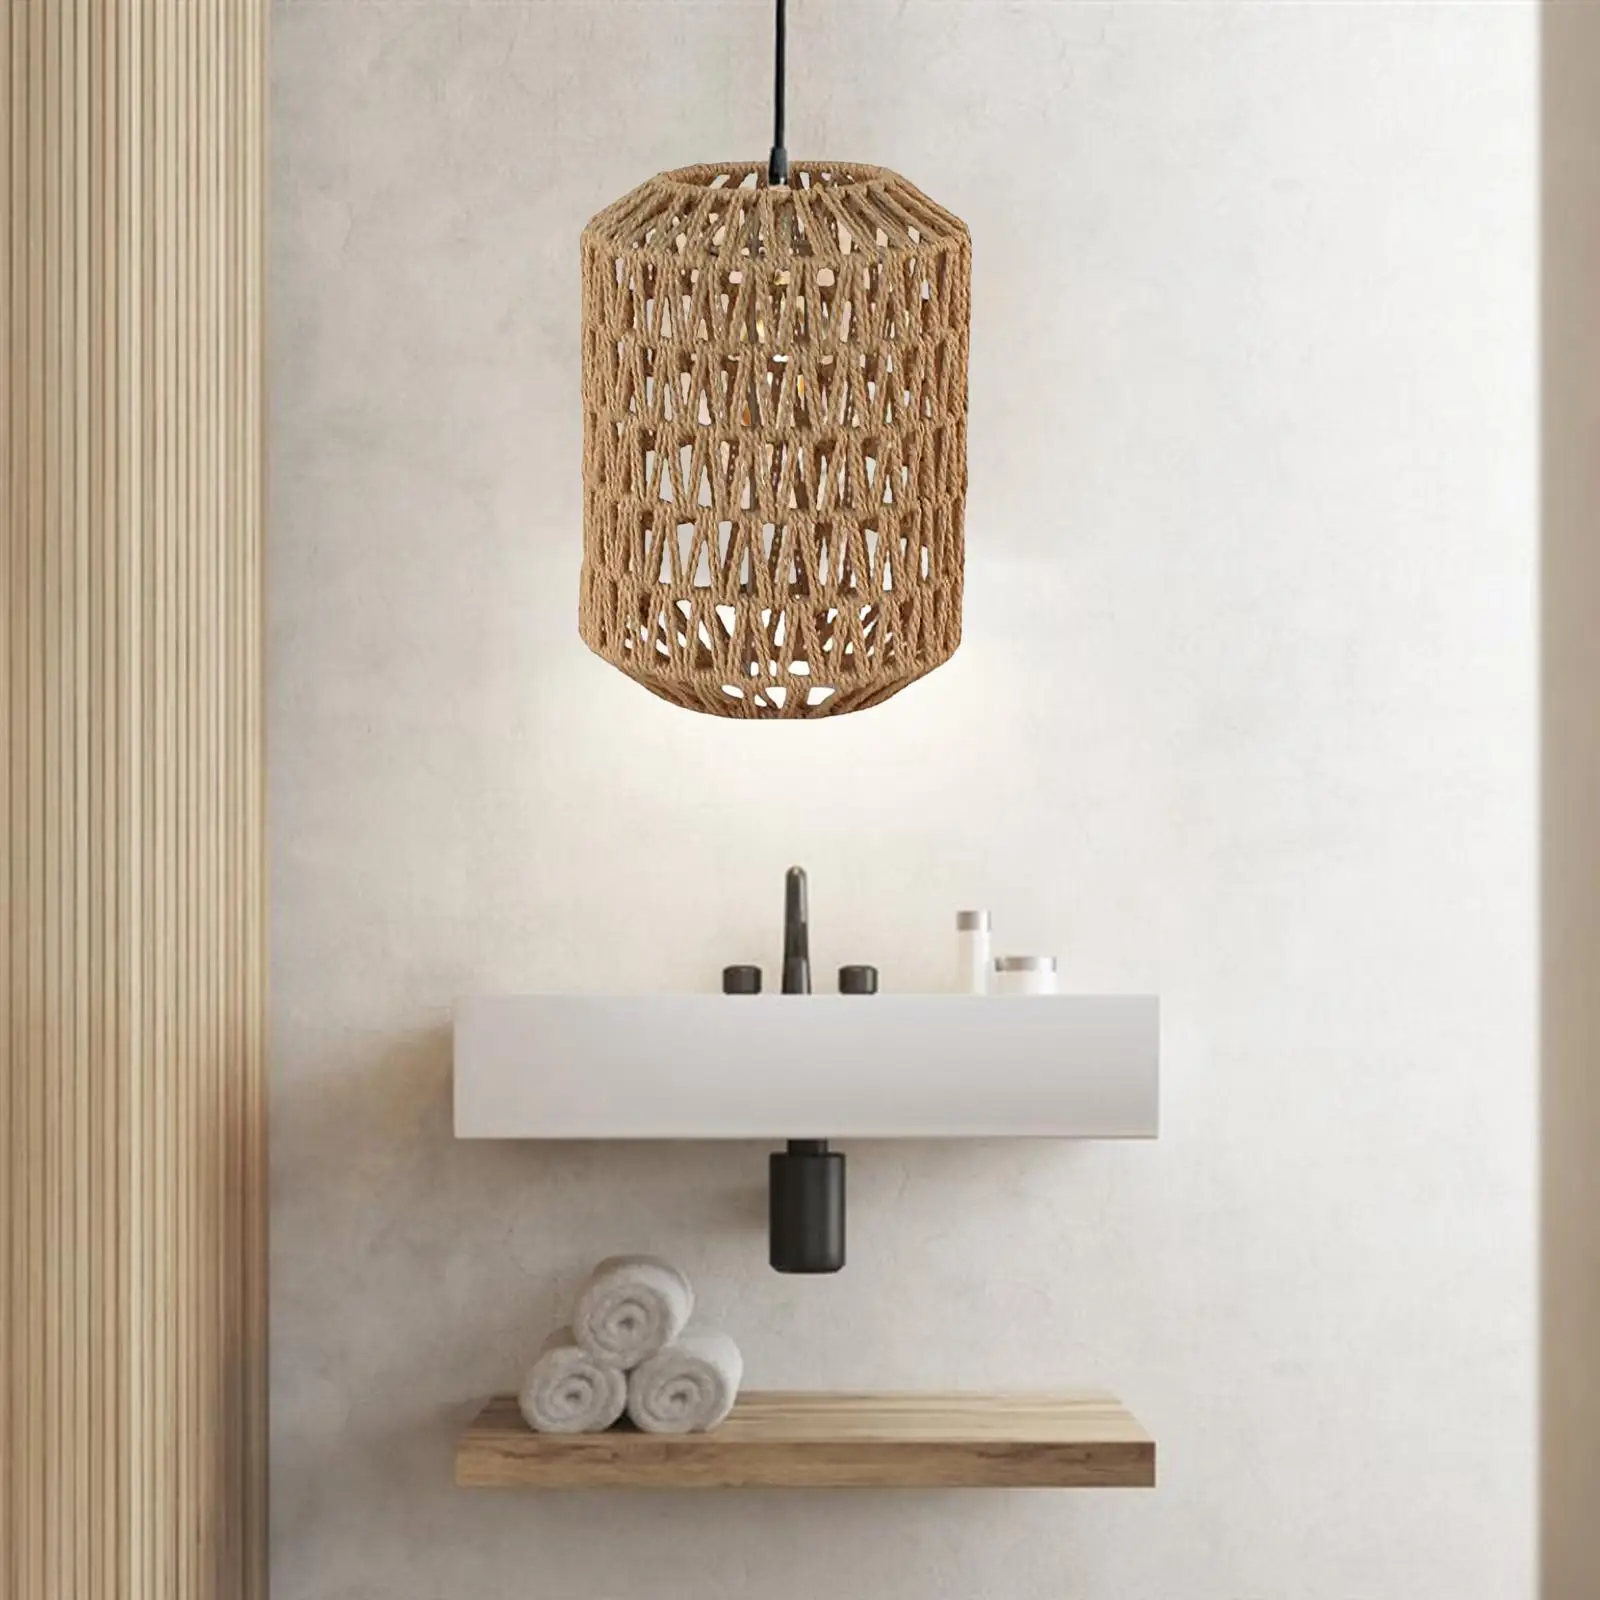 Pendant Lamp Shade Classic Ceiling Light Shade Paper Rope Lampshade for Living Room Outdoor Restaurant Kitchen Island Decoration